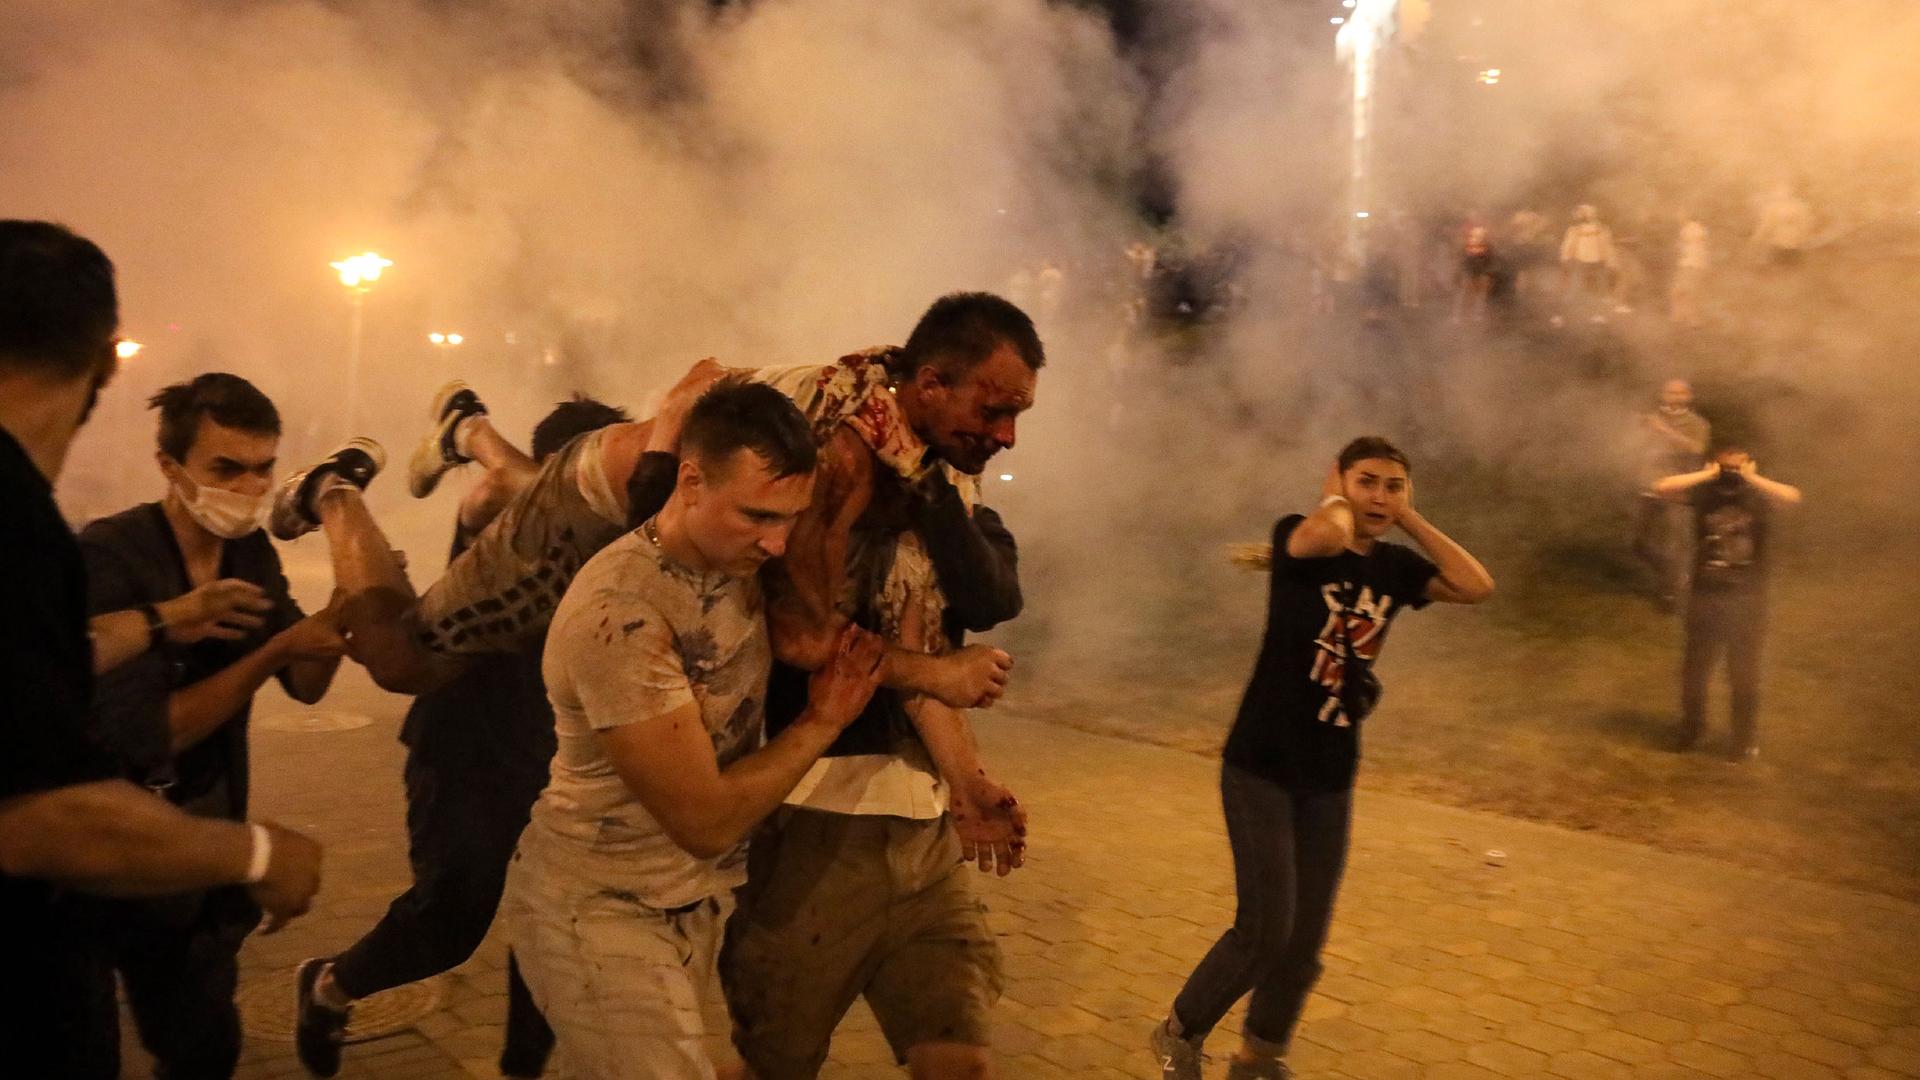 Several people are shown carrying an injured protester on their shoulders with smoke all around them.